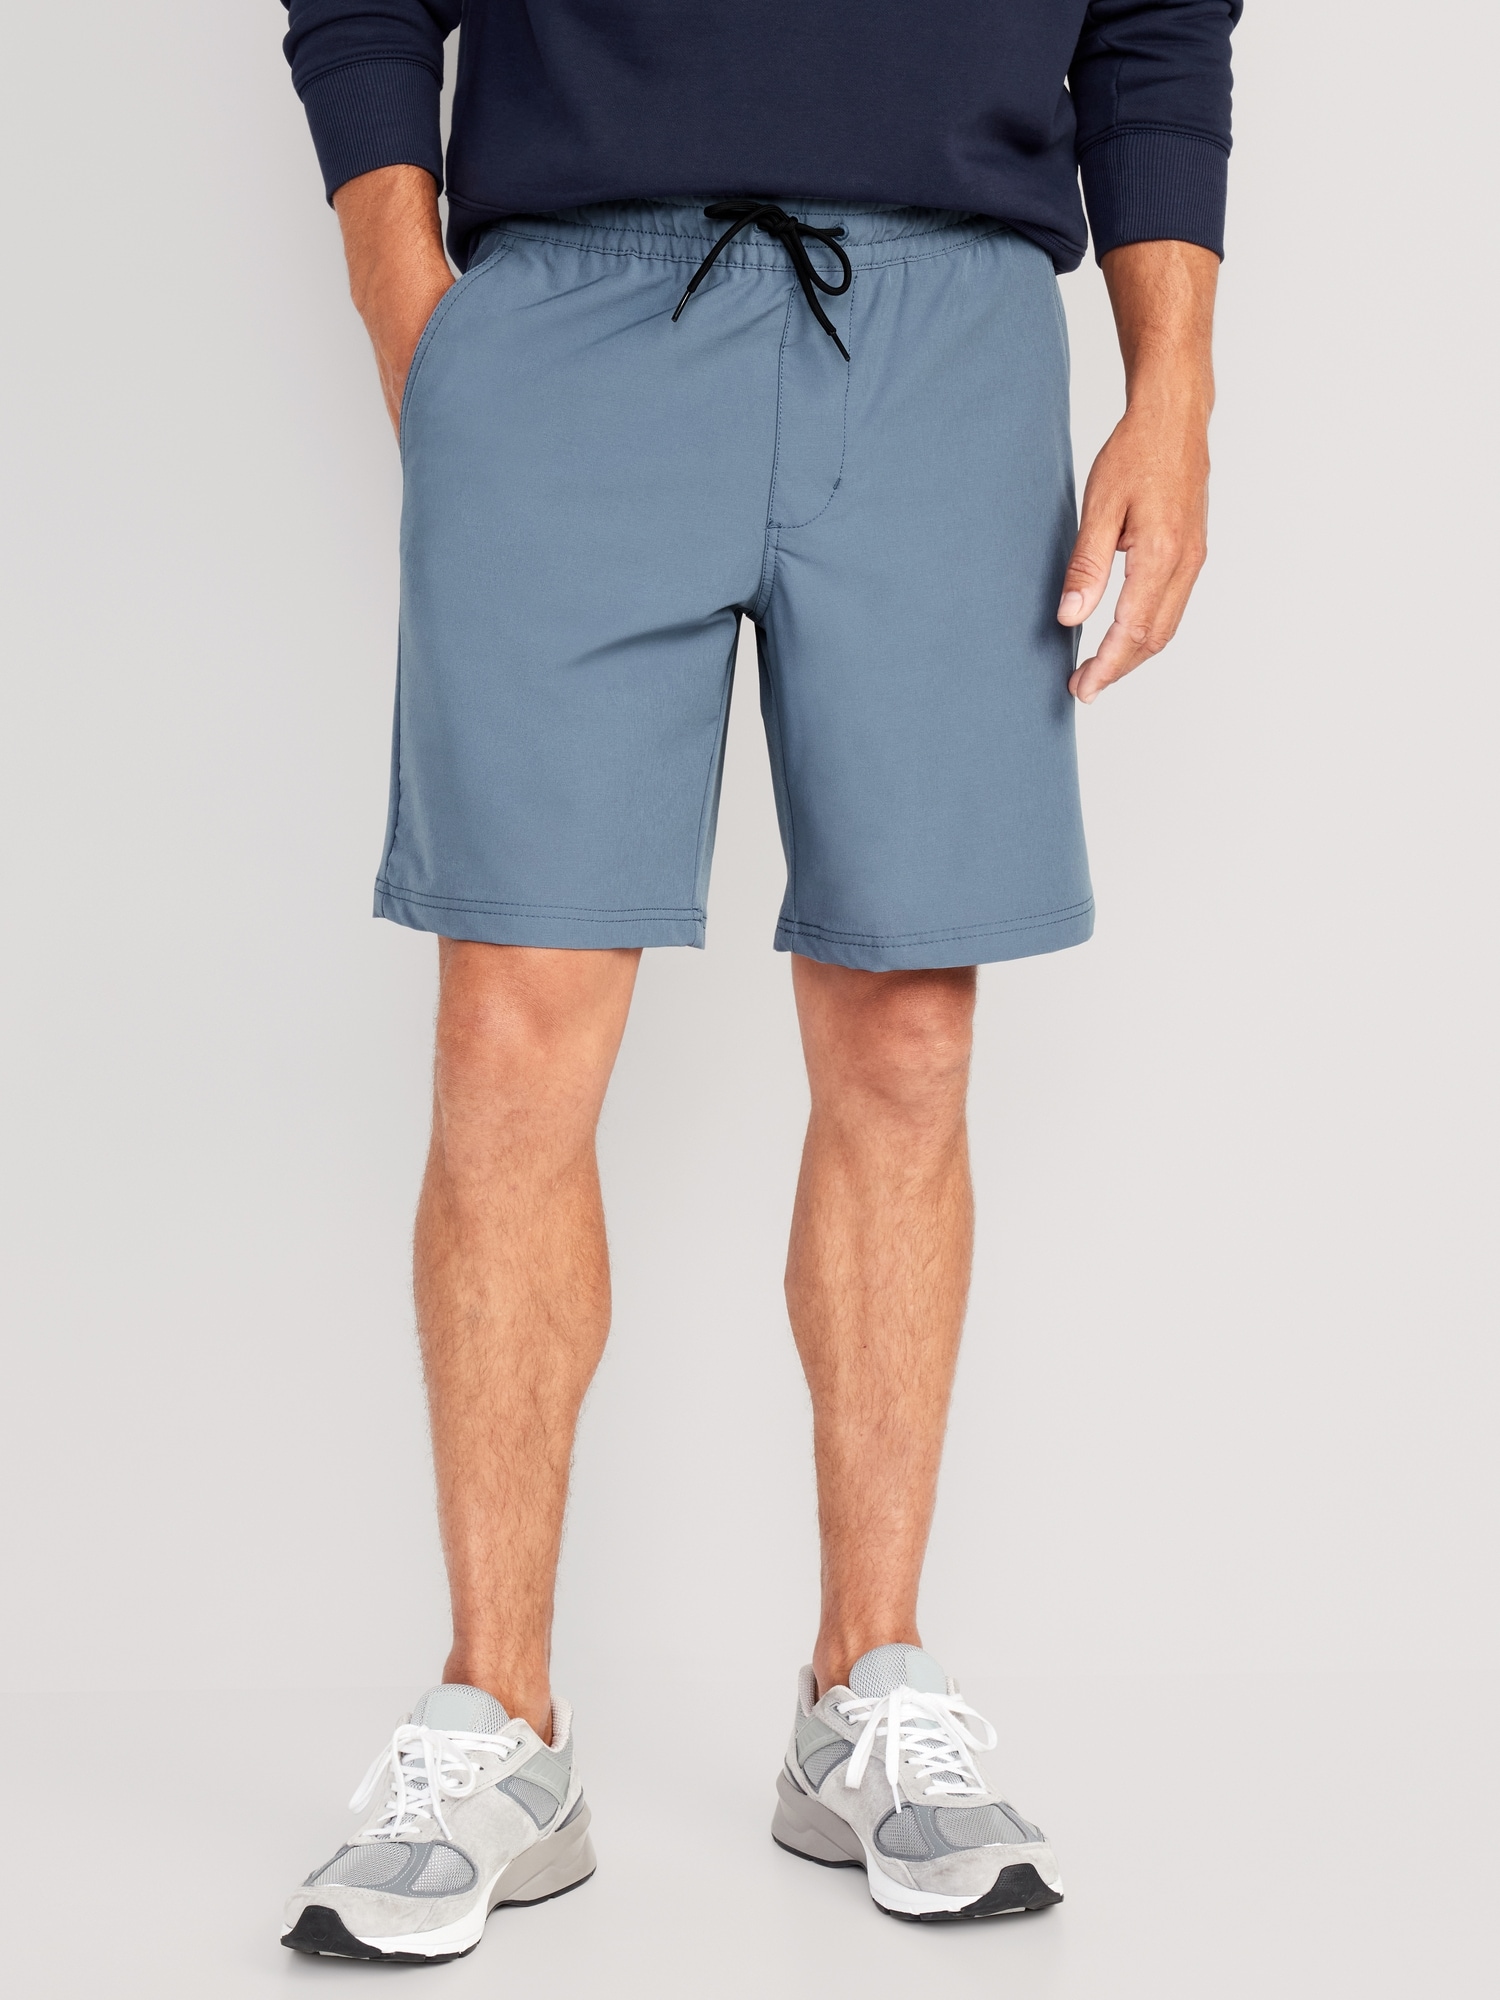 Men's Shorts with Phone Pocket